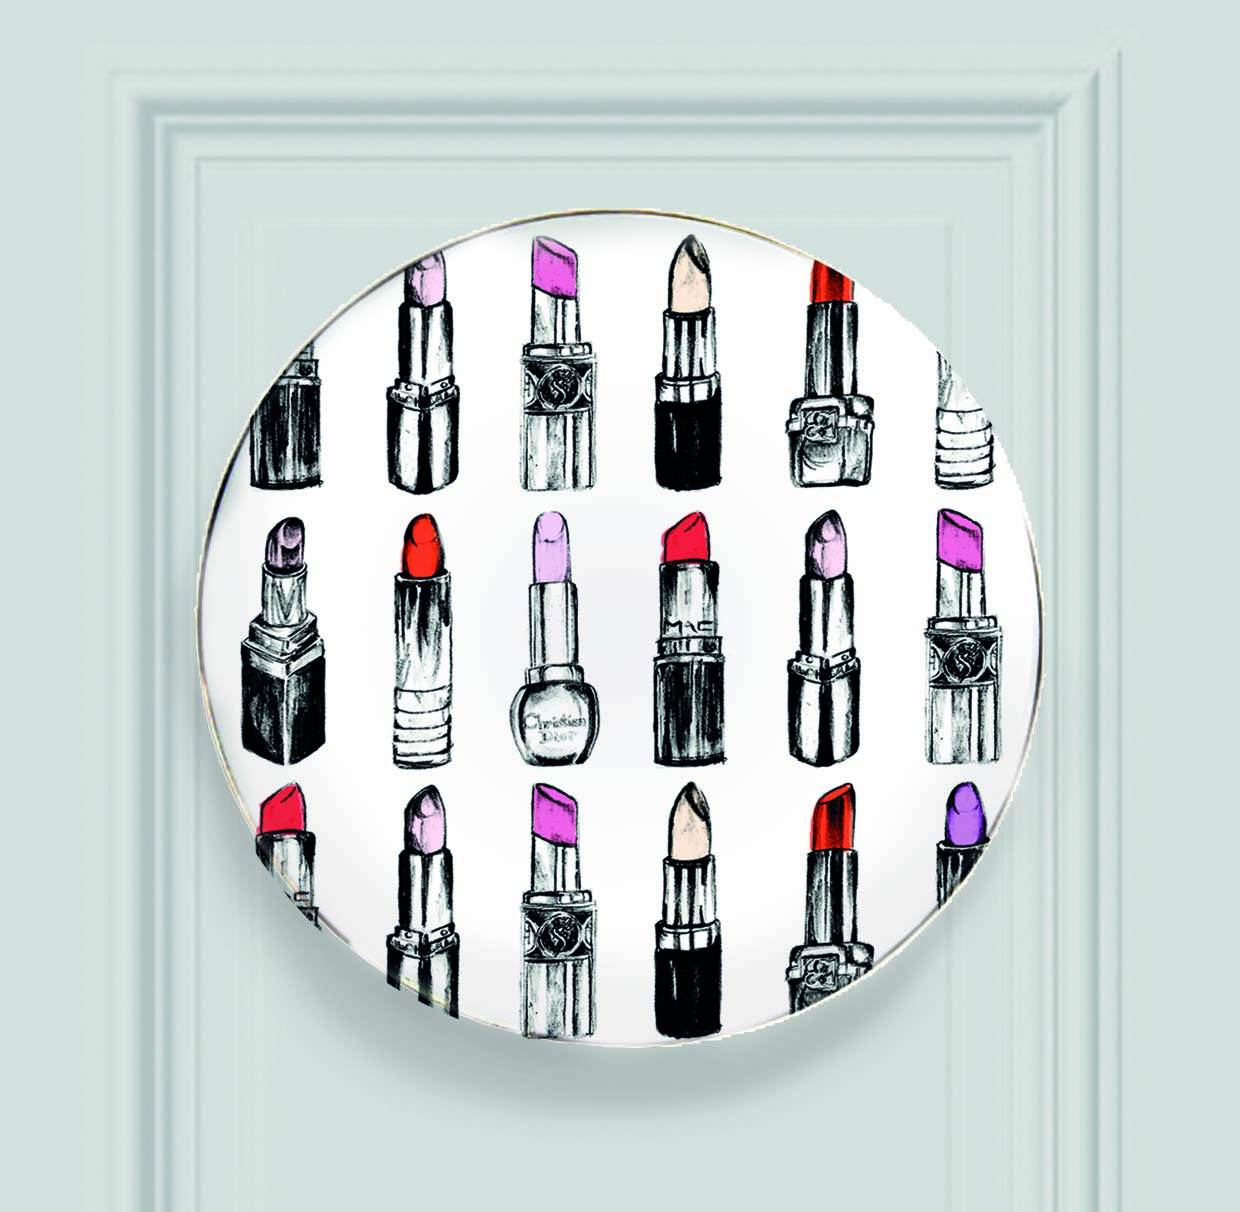 Lipstick Collection